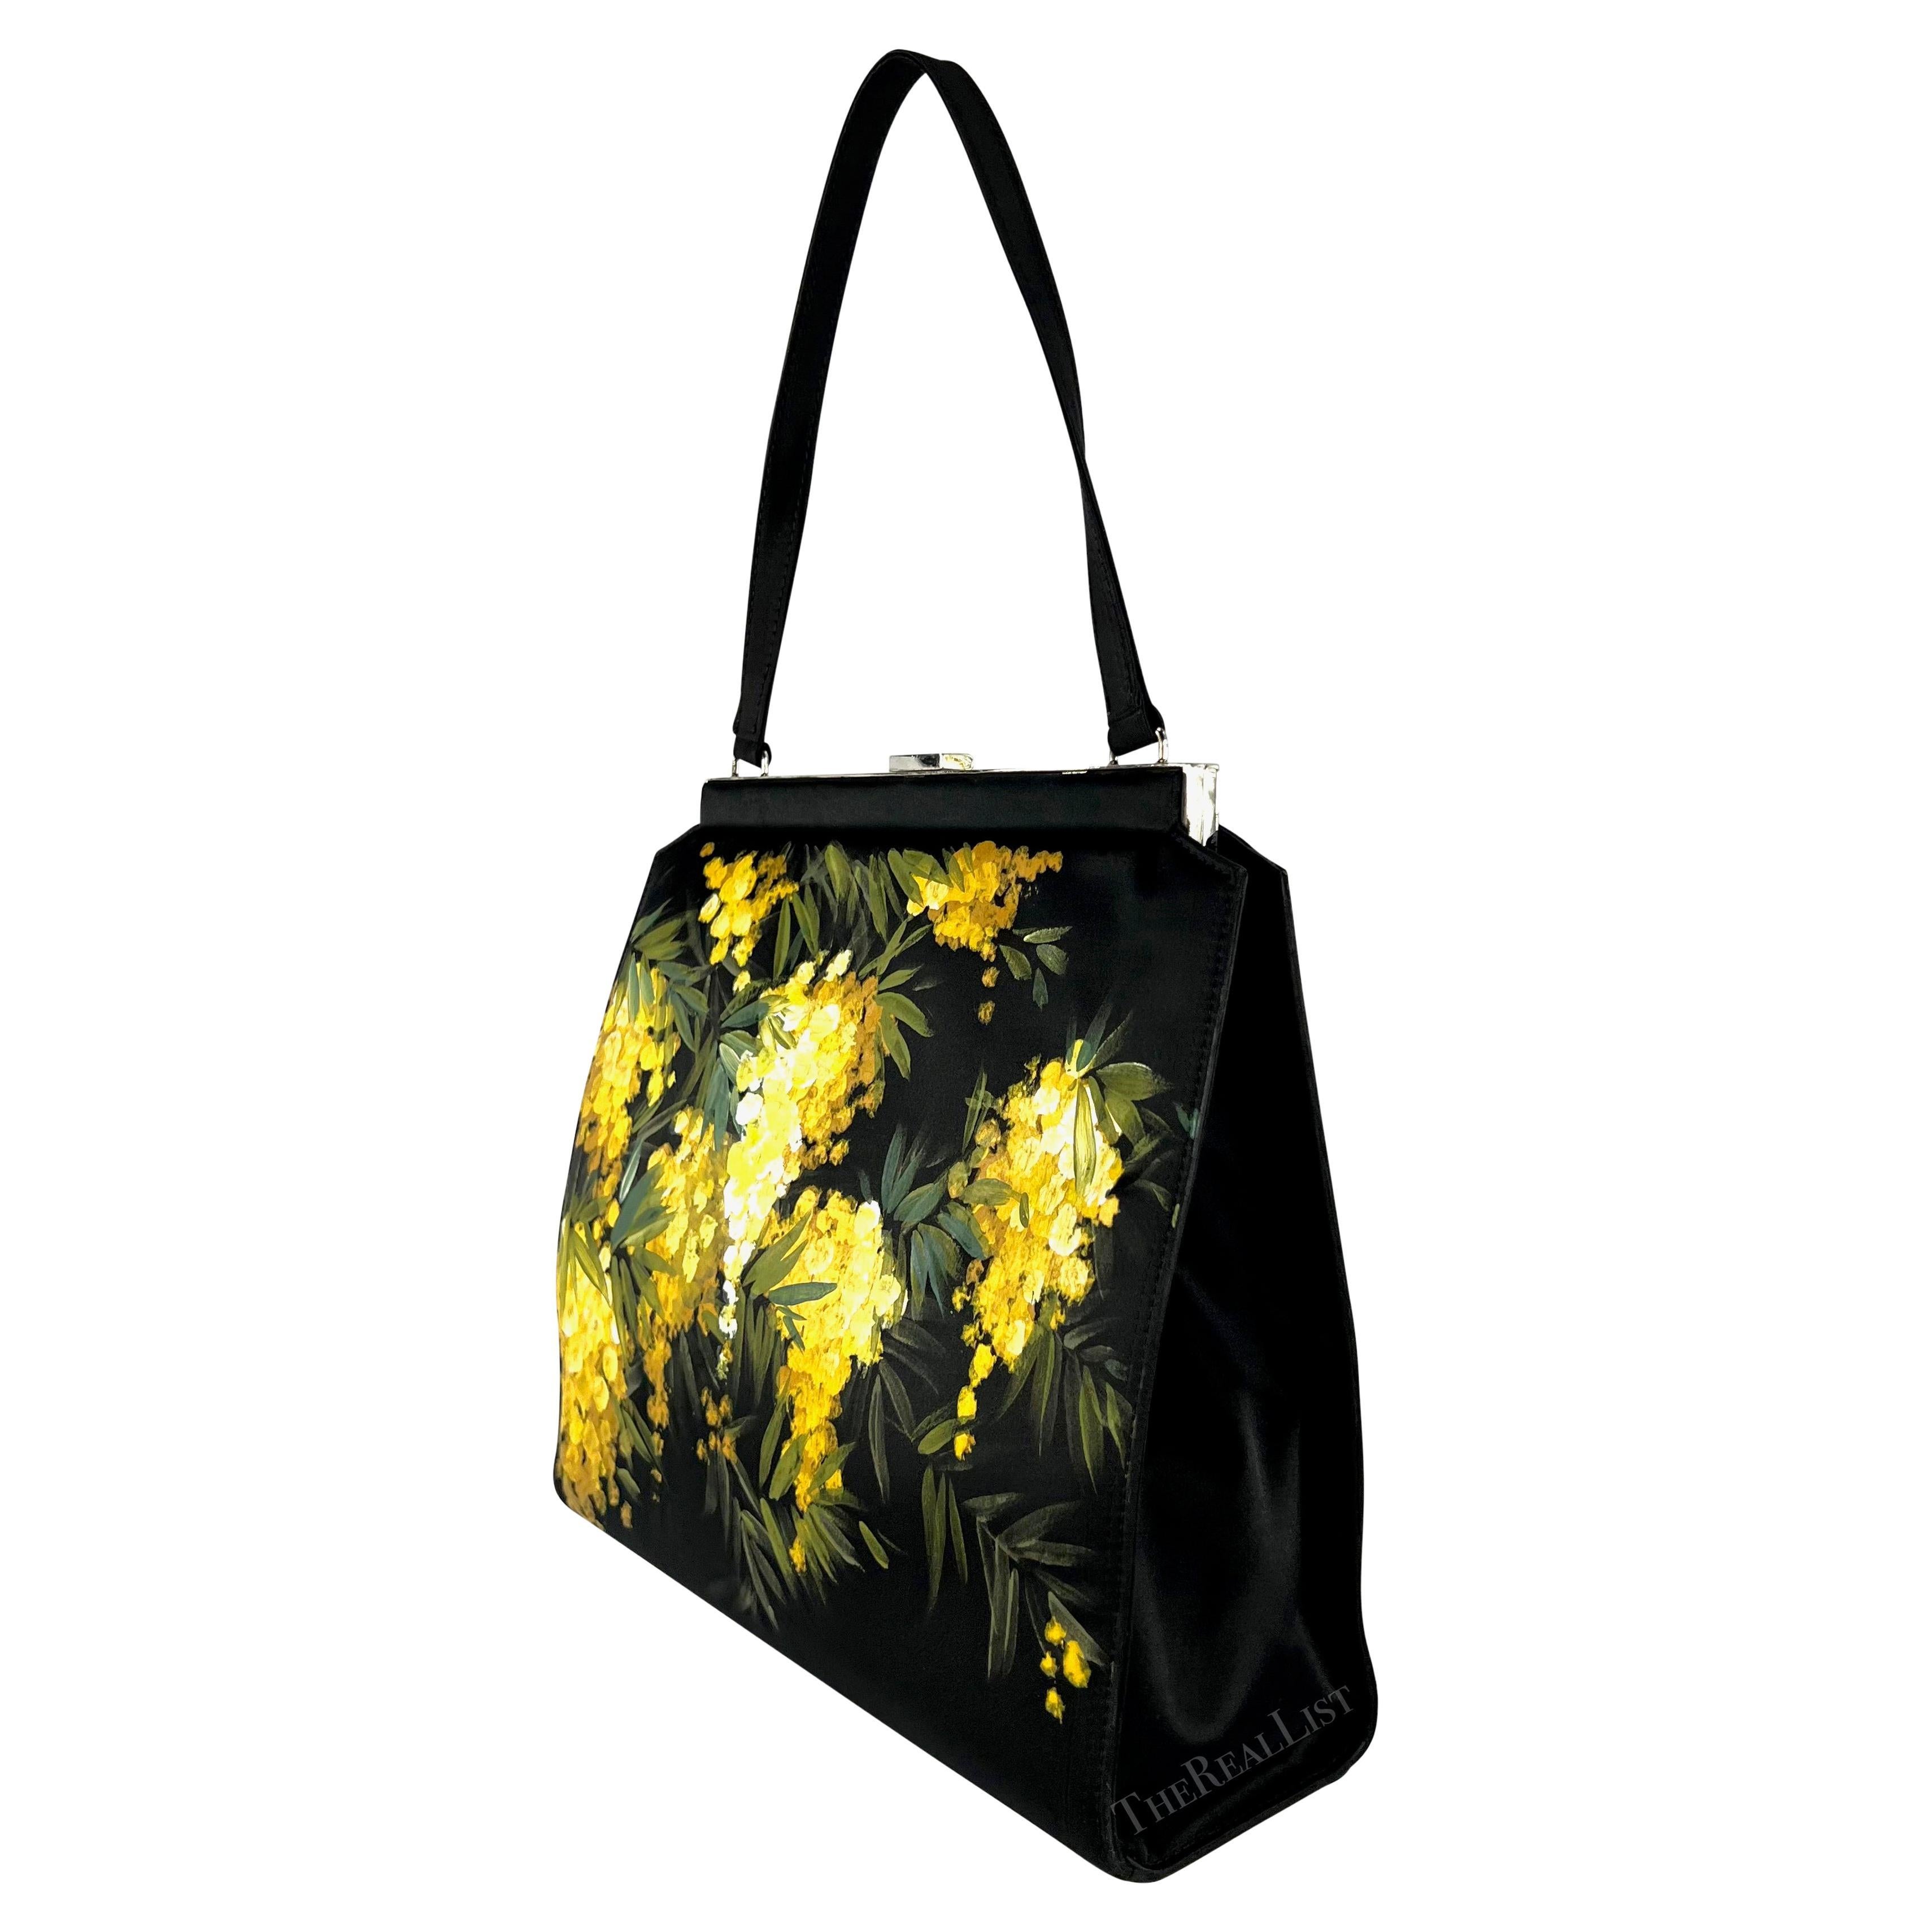 Presenting a stunning black satin Dolce & Gabbana top handle bag. From the Fall/Winter 1998 collection, this black satin bag features silver-tone hardware and a clamshell closure. The bag is elevated with a hand-painted yellow floral butterfly